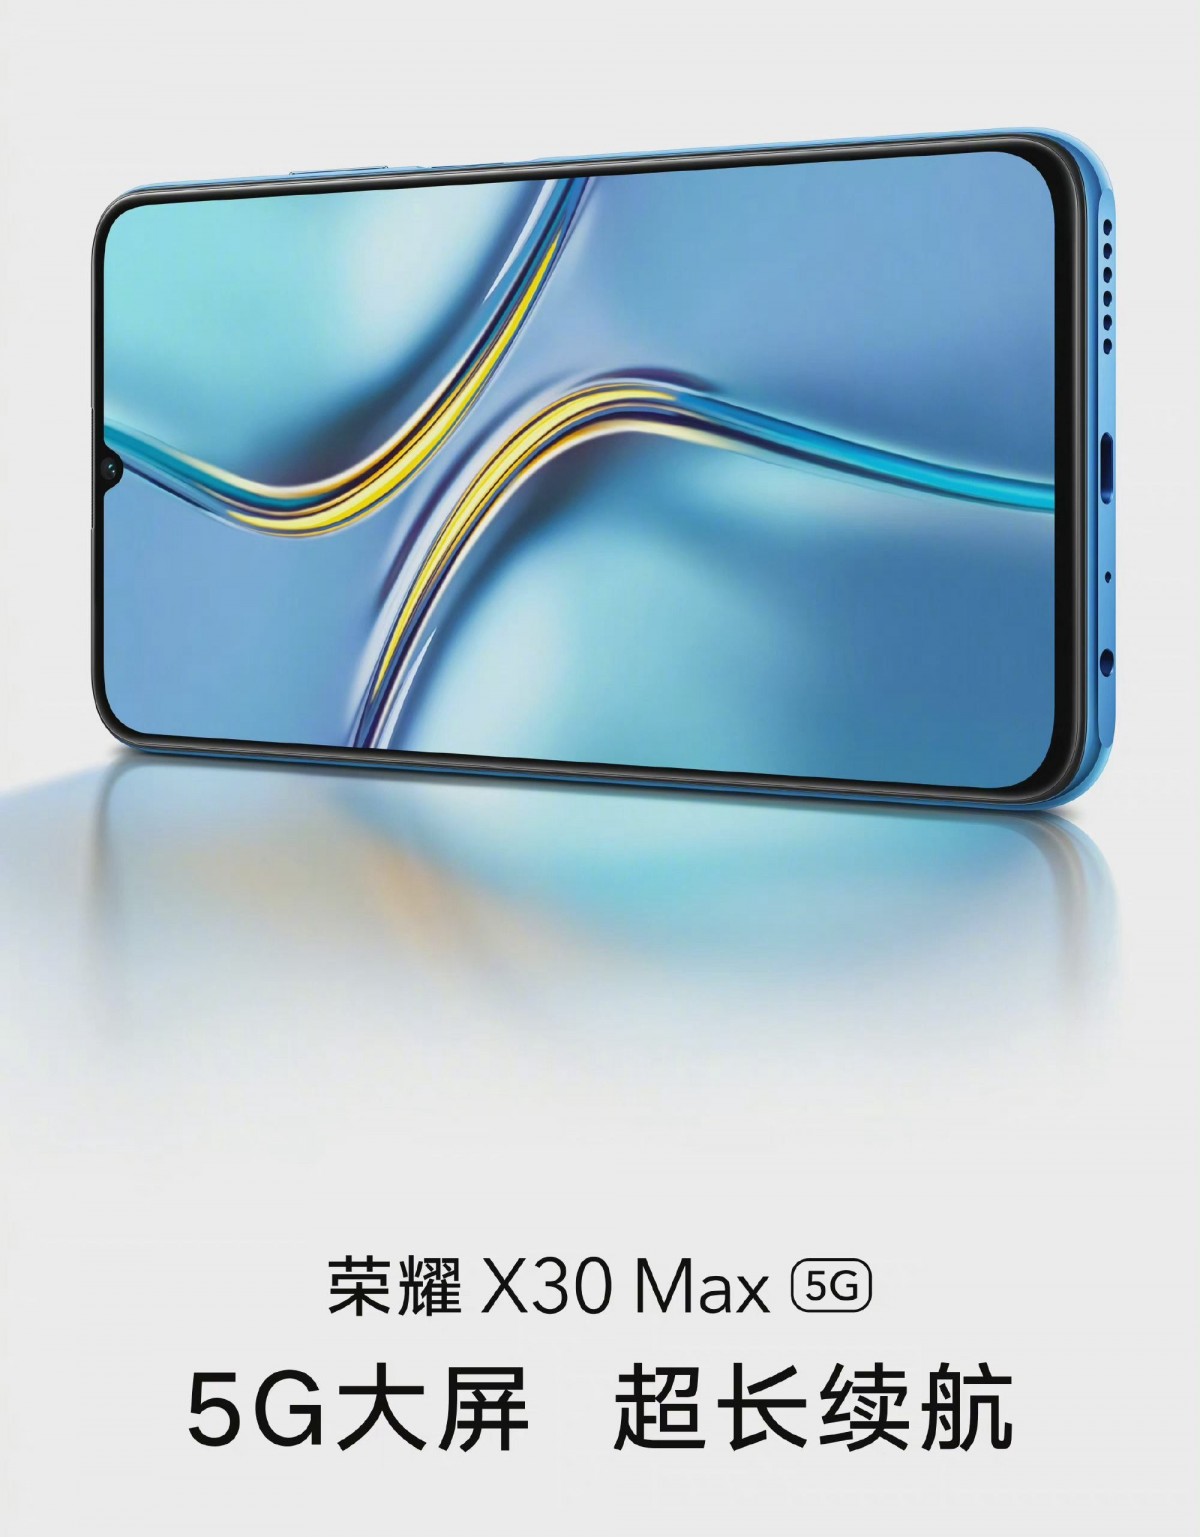 Honor sheds light on the X30i with more official images